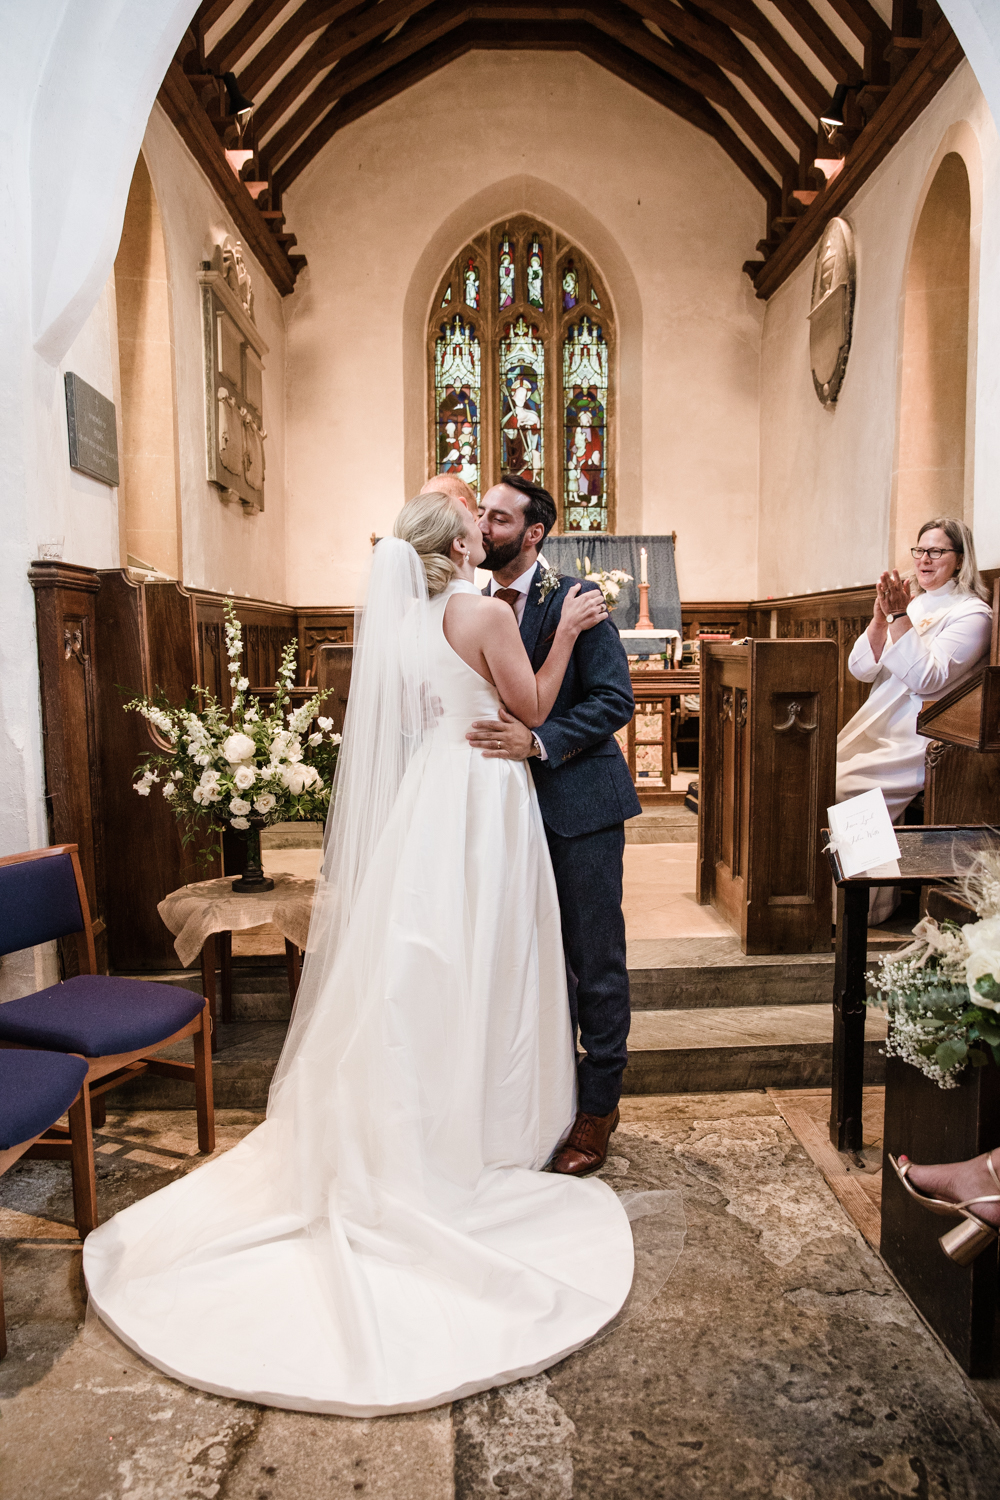 A newly married couple kiss following a church wedding ceremony